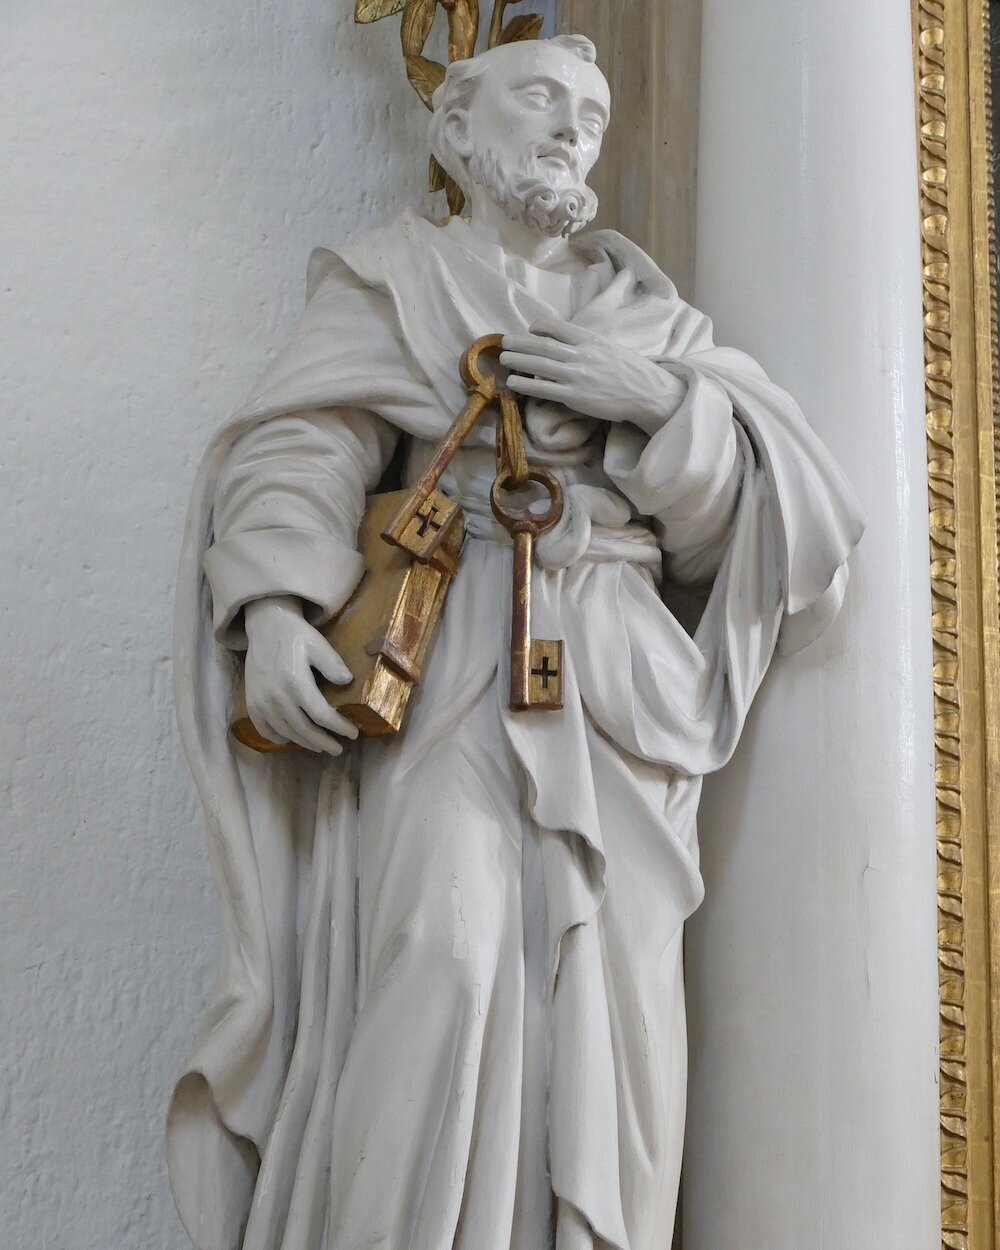 Saint Peter with the Keys to Heaven